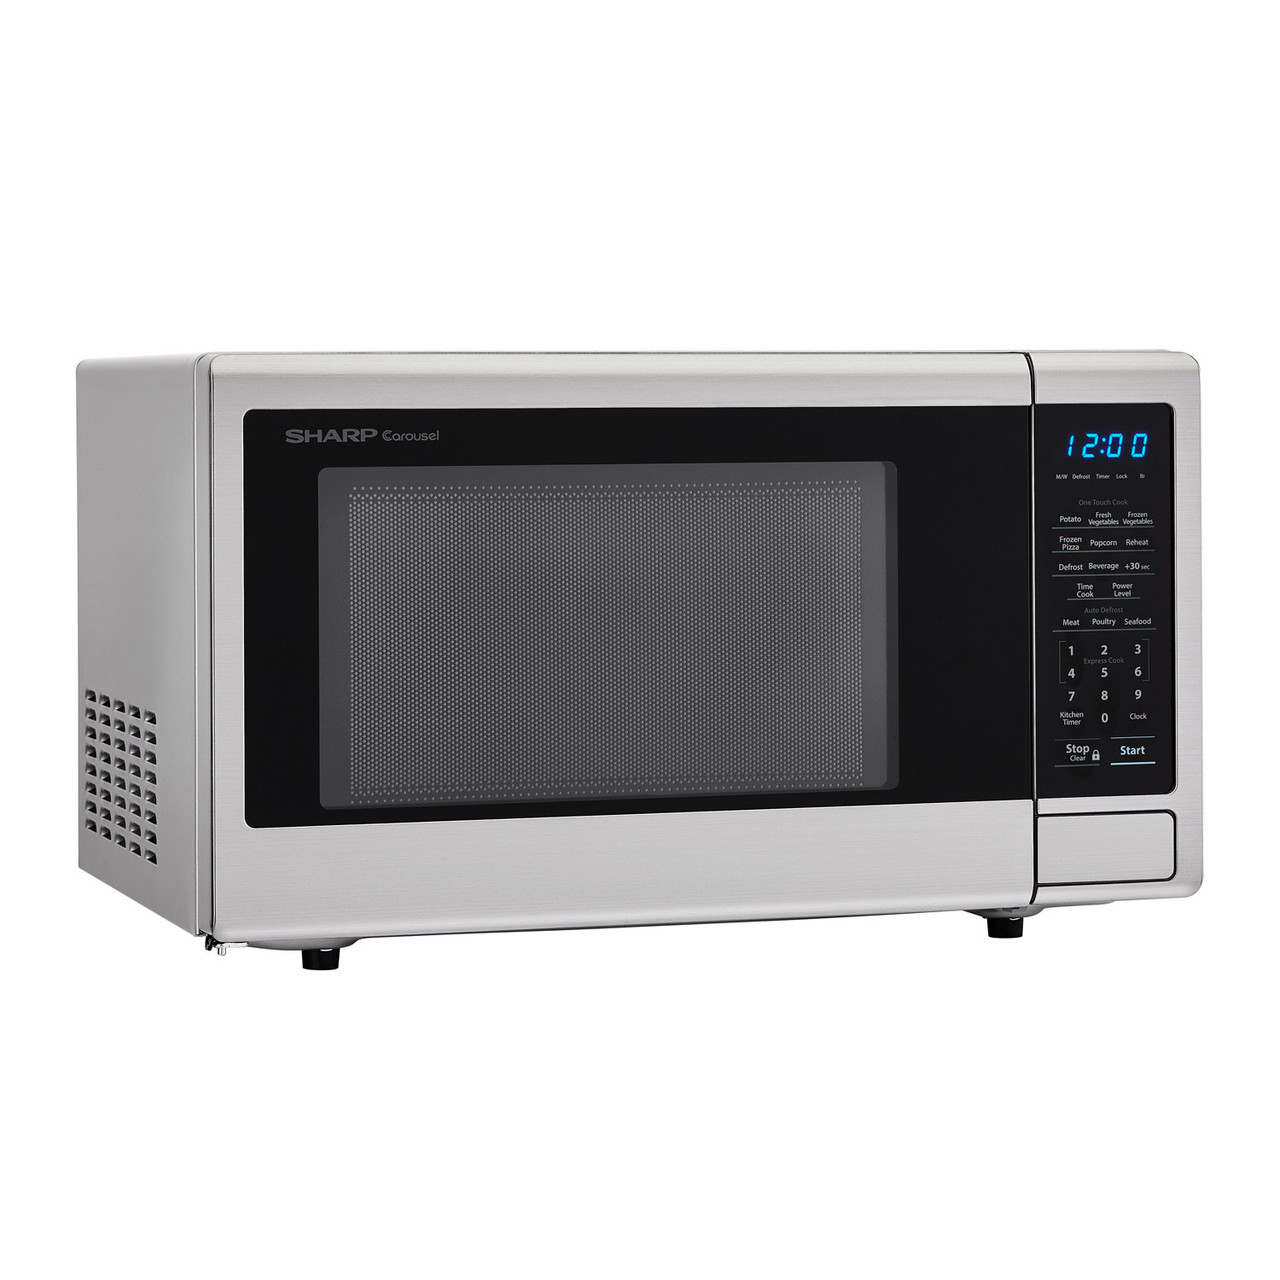 Sharp Carousel 20" 1.1 CU. Ft. 1000W Stainless Steel Countertop Microwave Oven